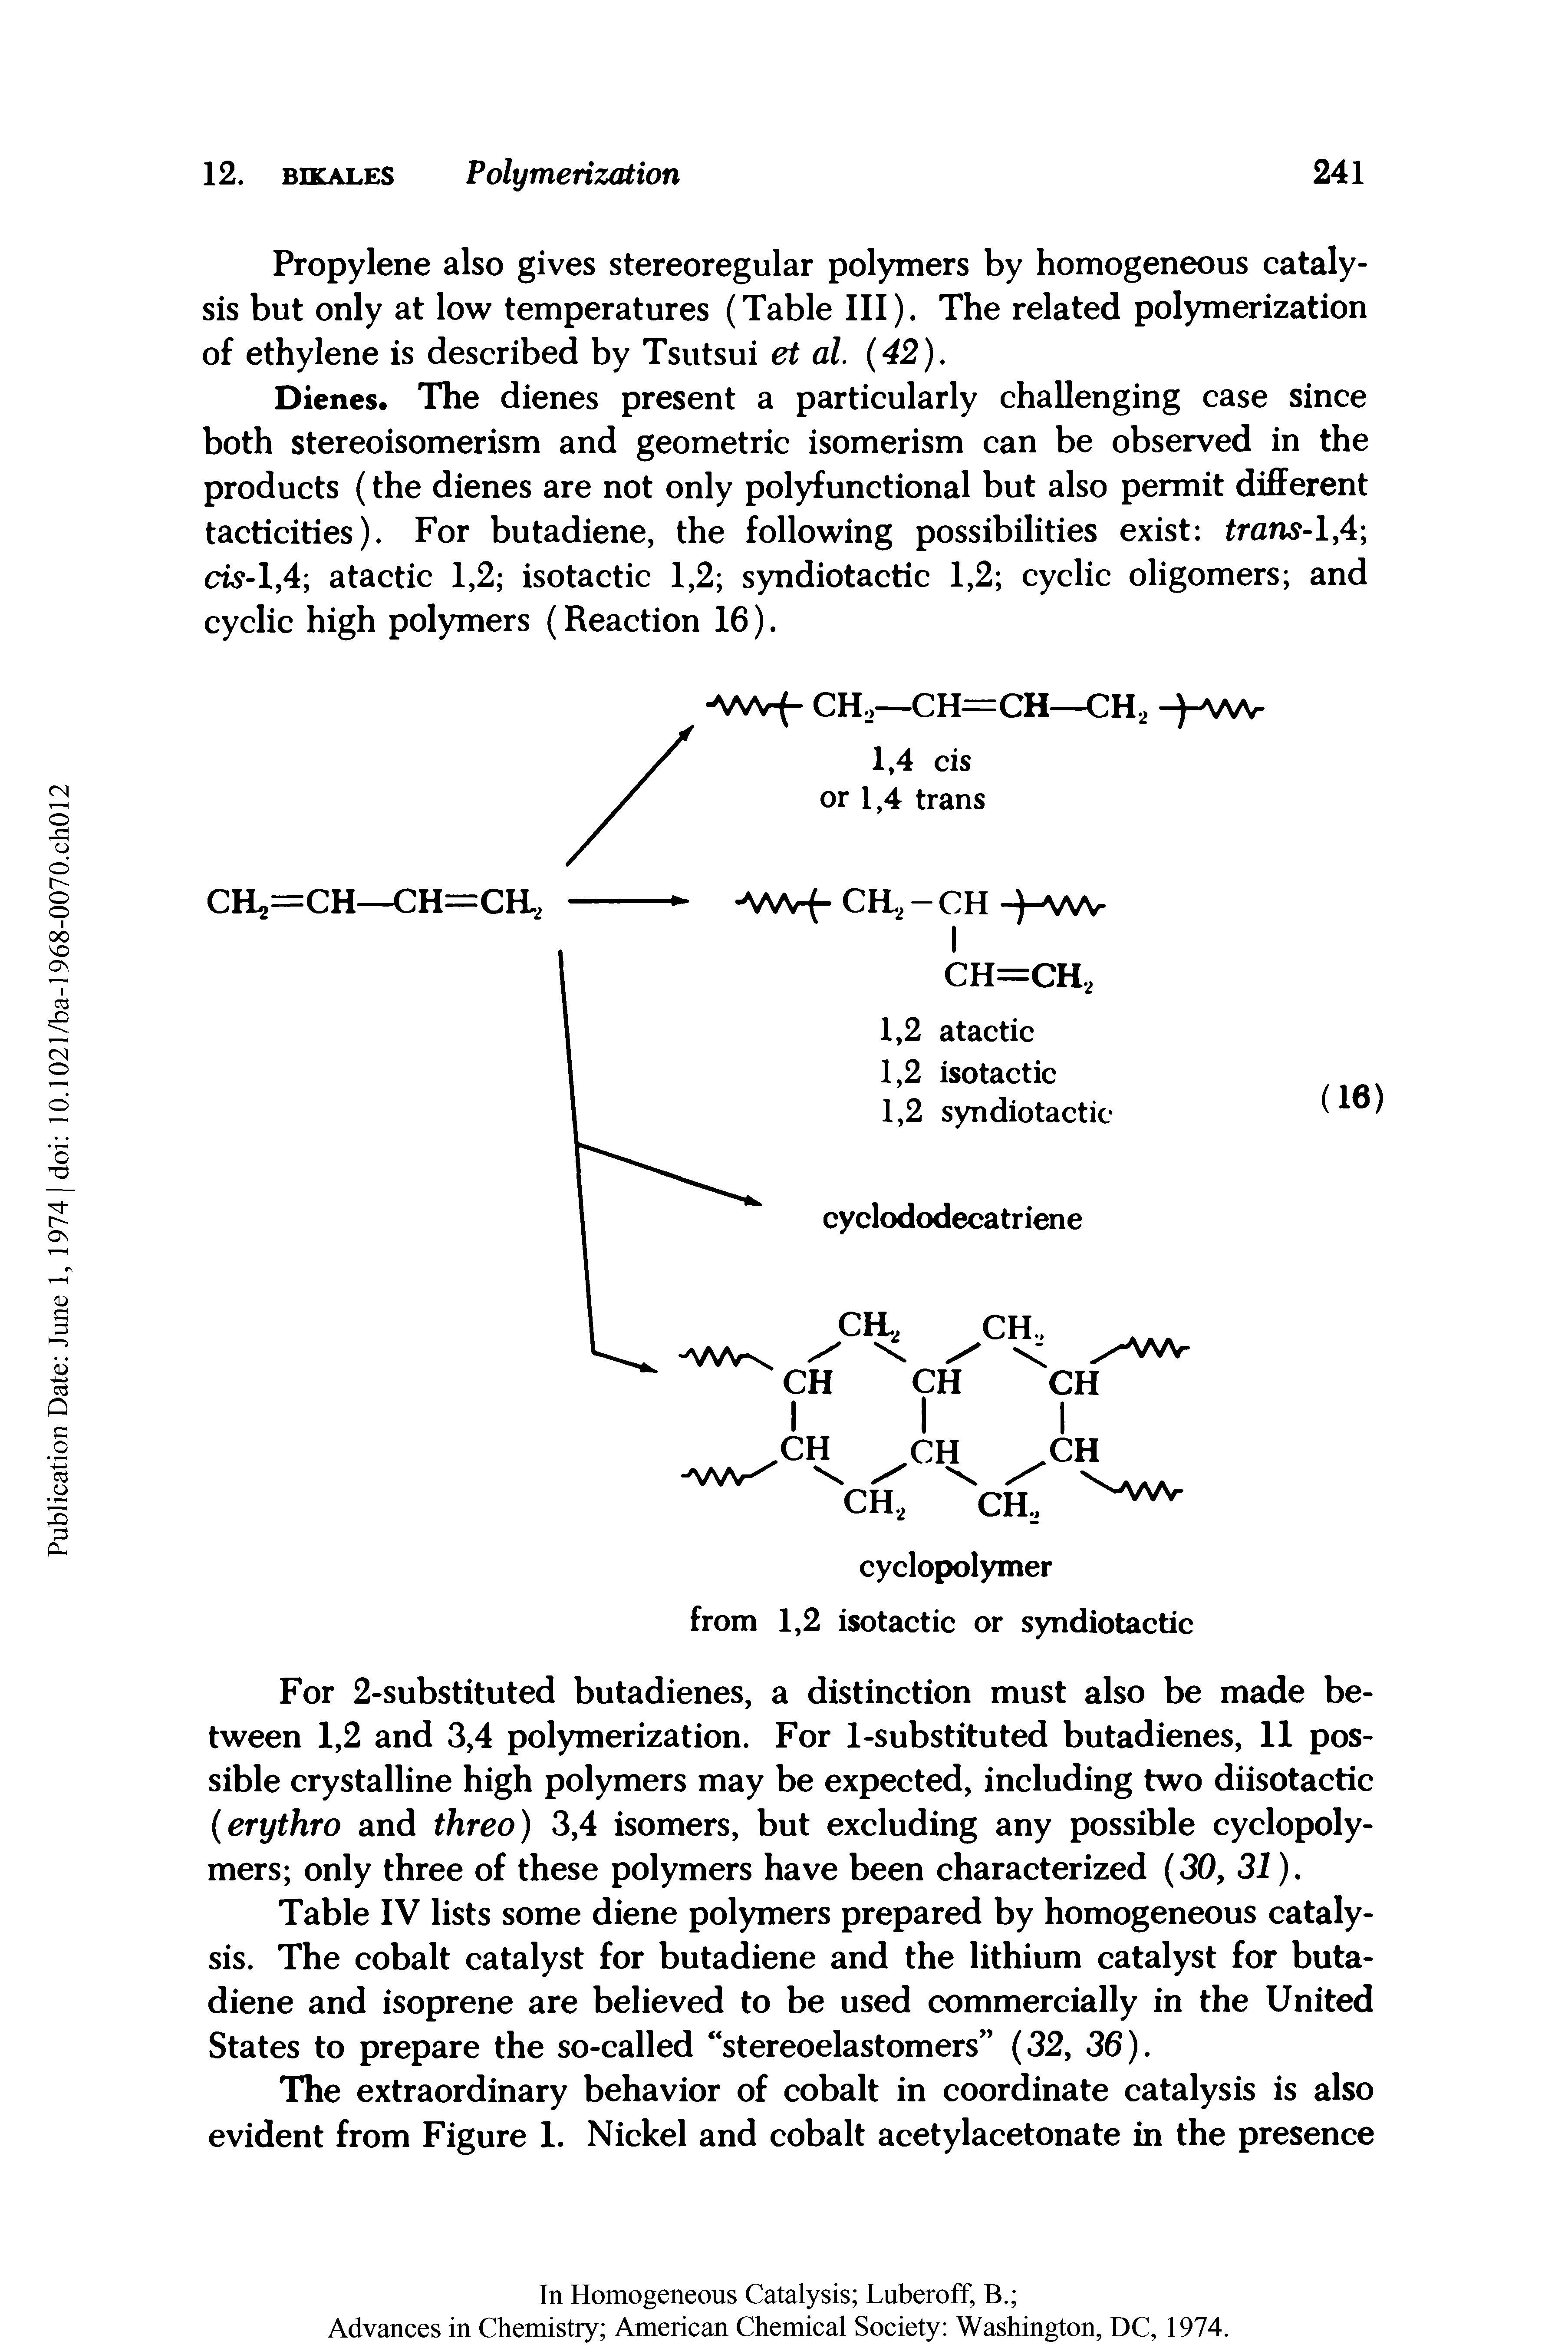 Table IV lists some diene polymers prepared by homogeneous catalysis. The cobalt catalyst for butadiene and the lithium catalyst for butadiene and isoprene are believed to be used commercially in the United States to prepare the so-called stereoelastomers (32, 36).